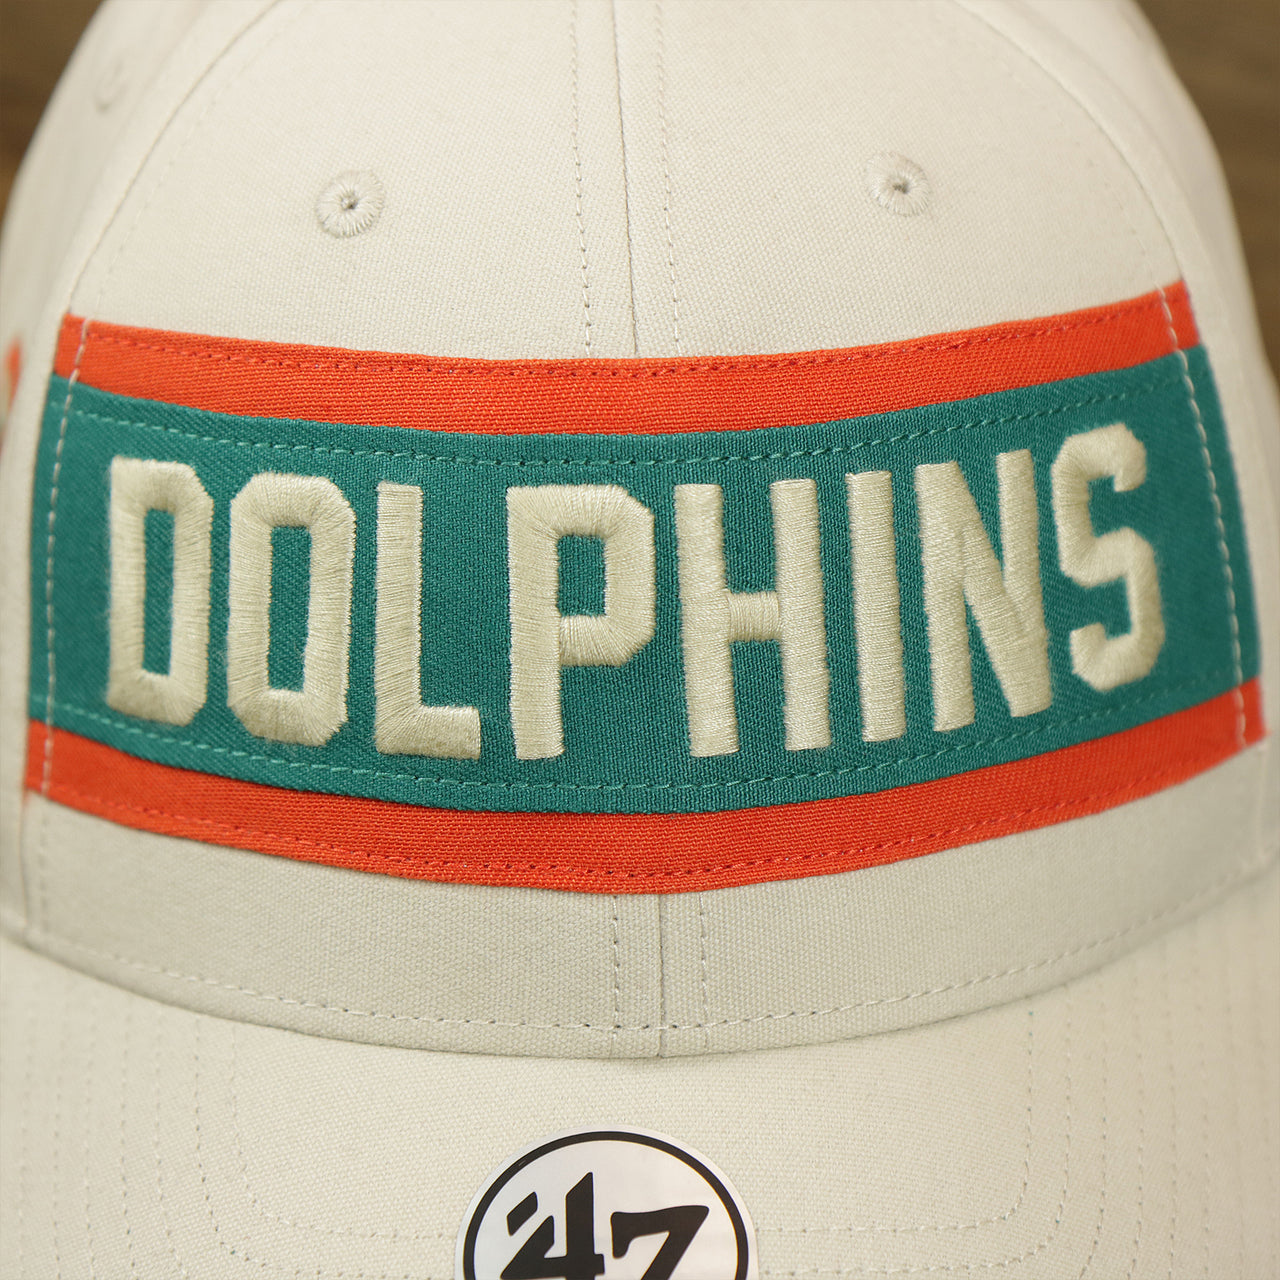 The Dolphins Wordmark on the Throwback Miami Dolphins Striped Wordmark Legacy Dolphins Side Patch Crossroad Dad Hat | Bone Dad Hat